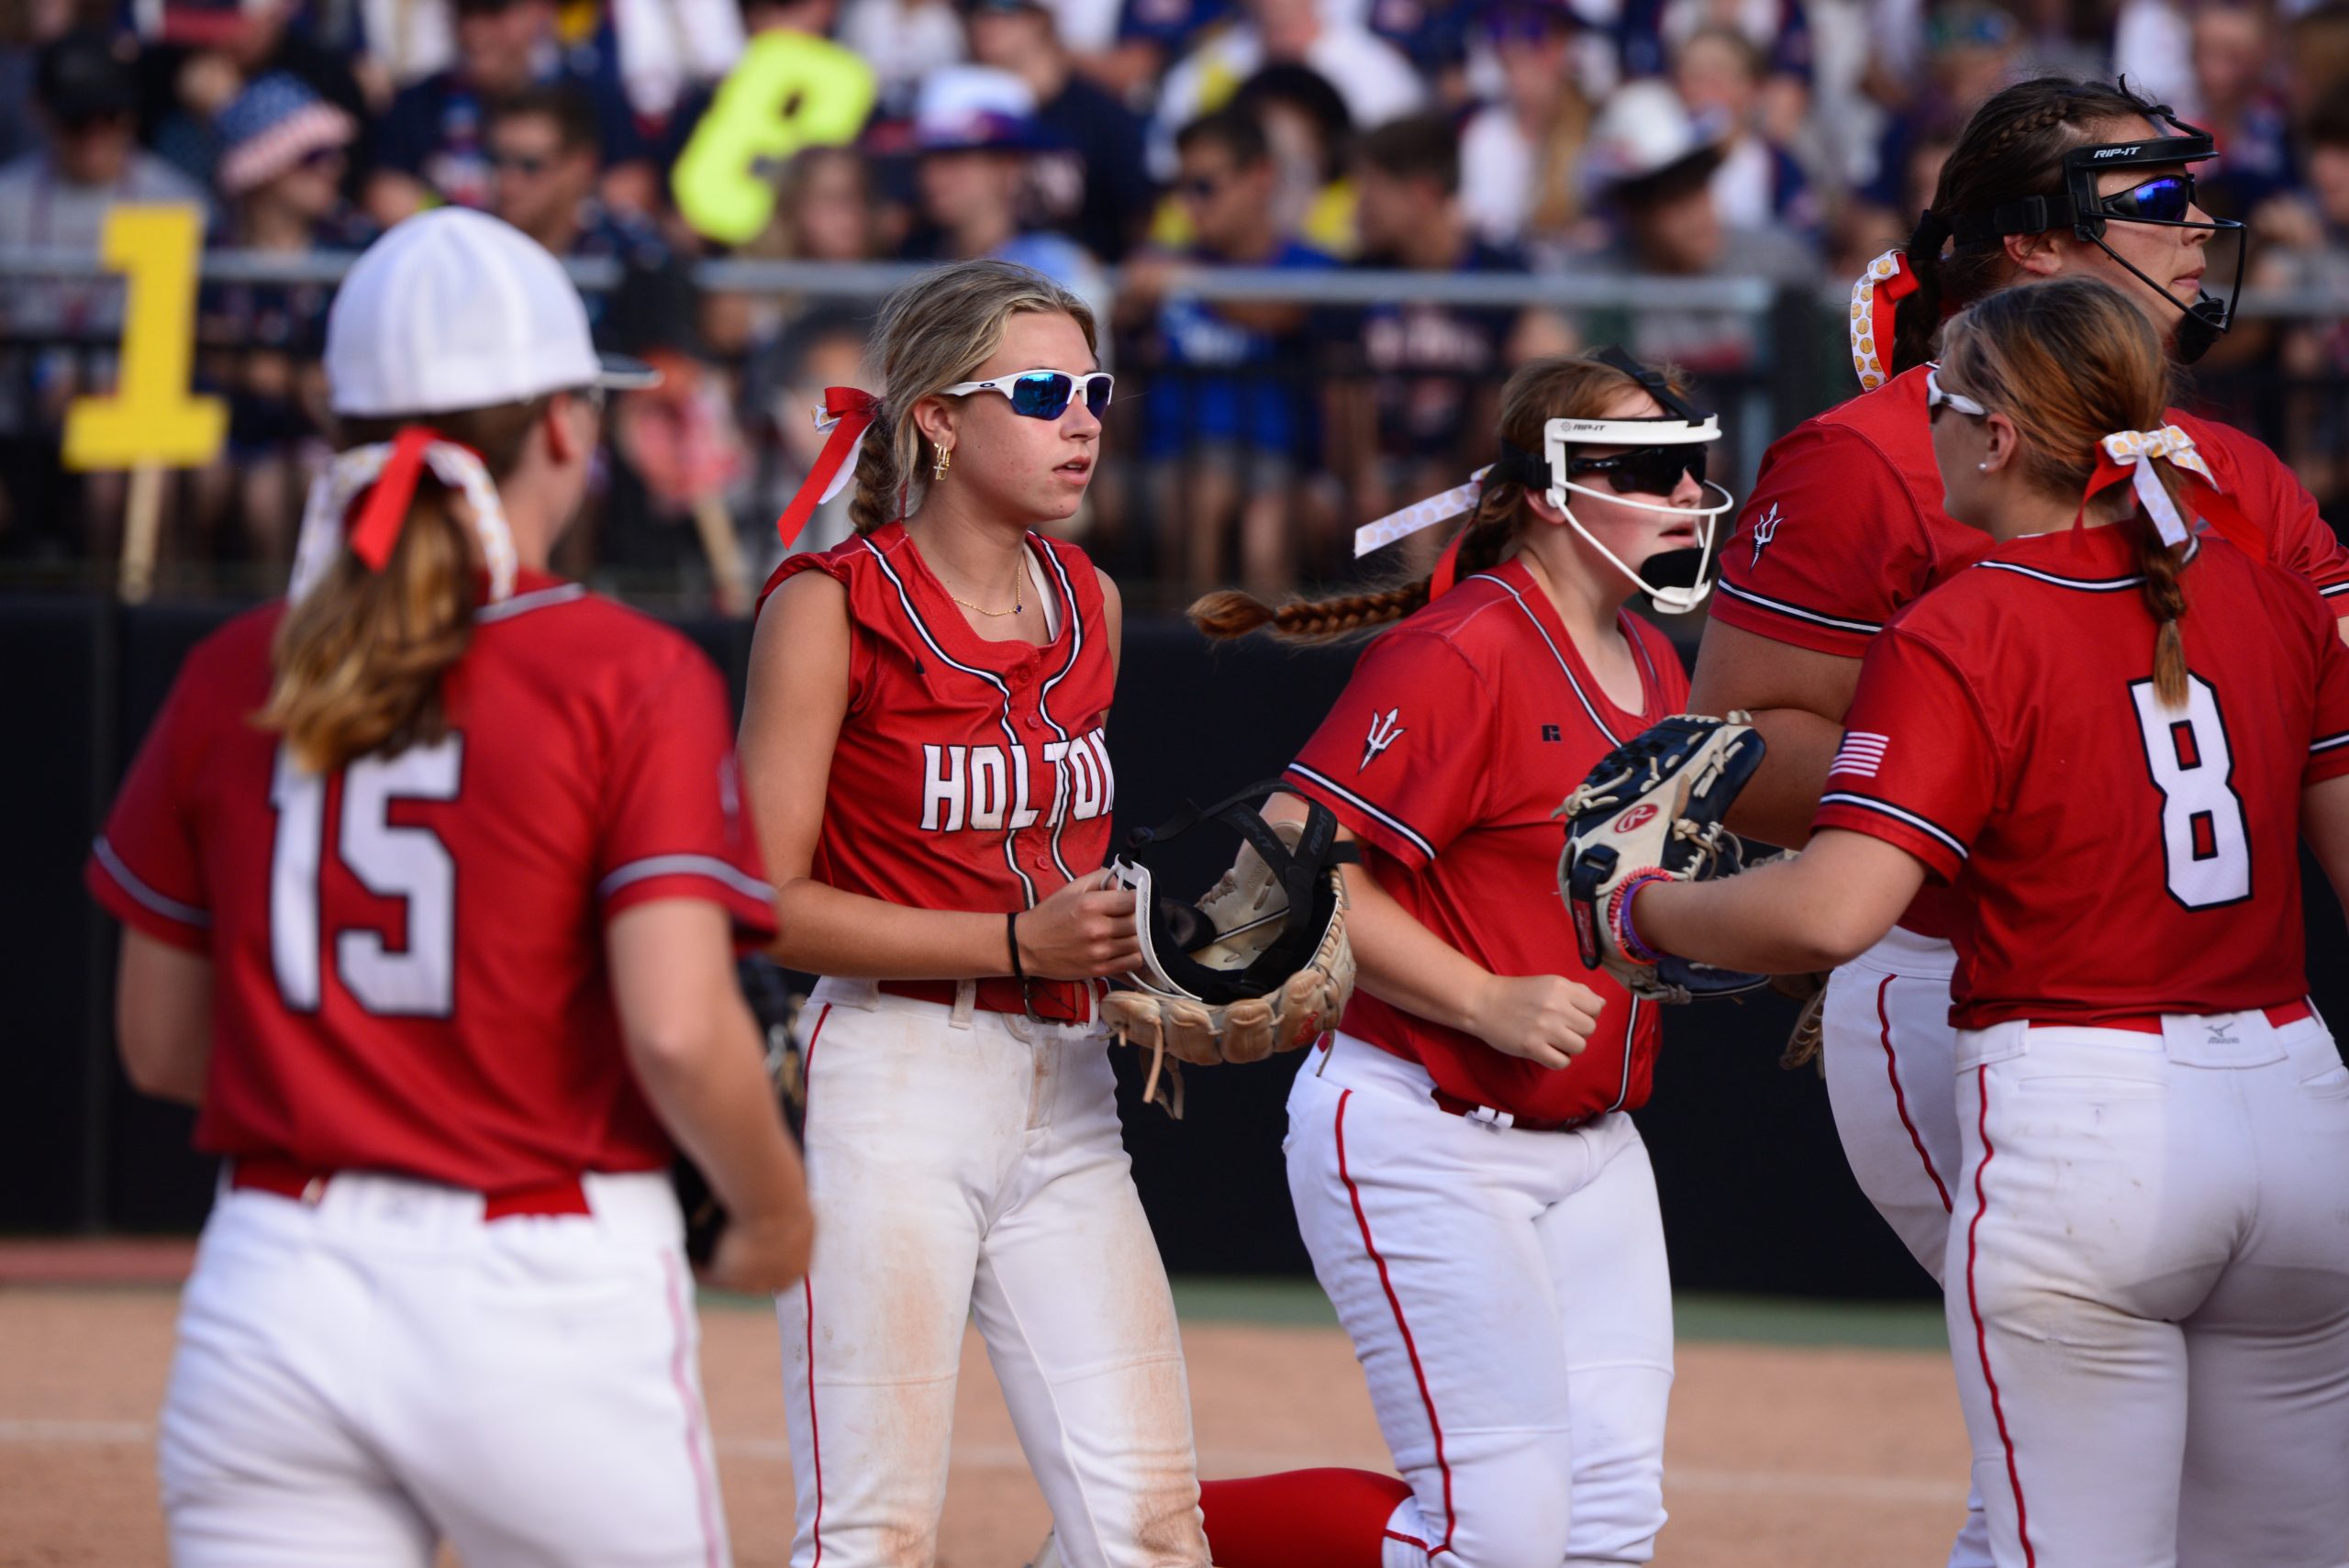 Holton’s historic softball season ends with loss in Division 4 title game to state powerhouse